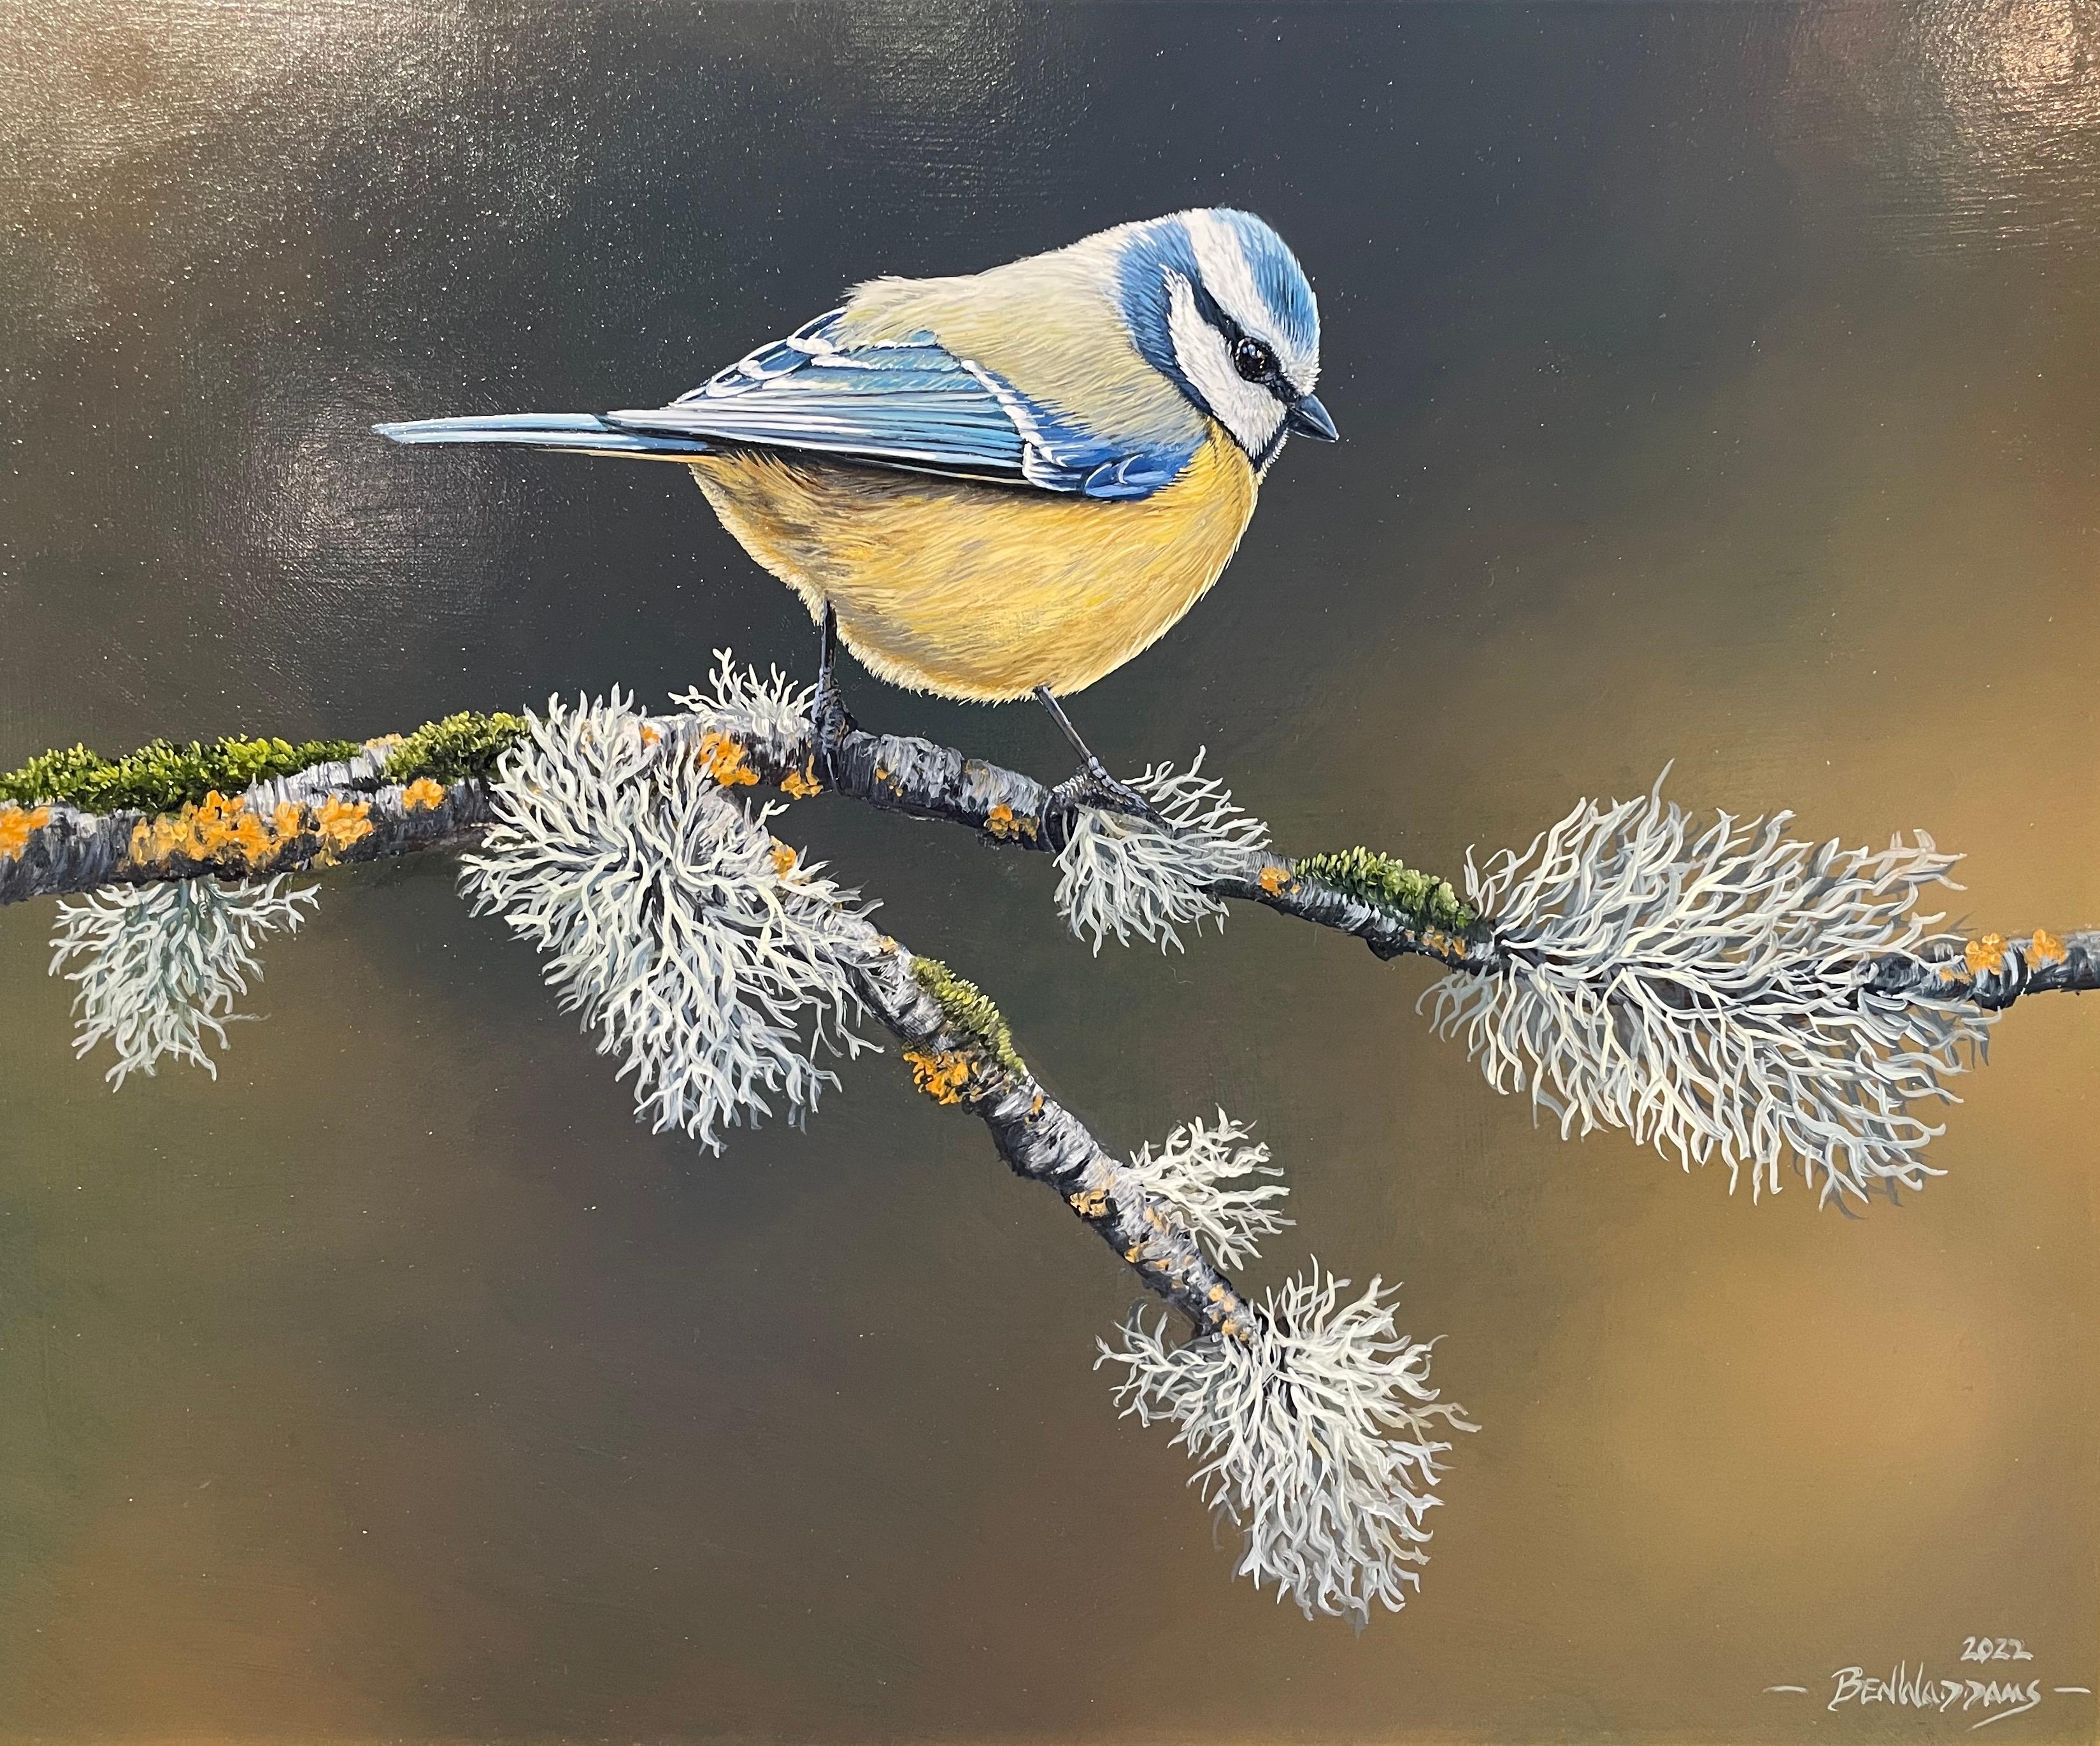 'Balancing Act' Contemporary Photorealist painting of Blue Tit bird in the wild - Painting by Ben Waddams